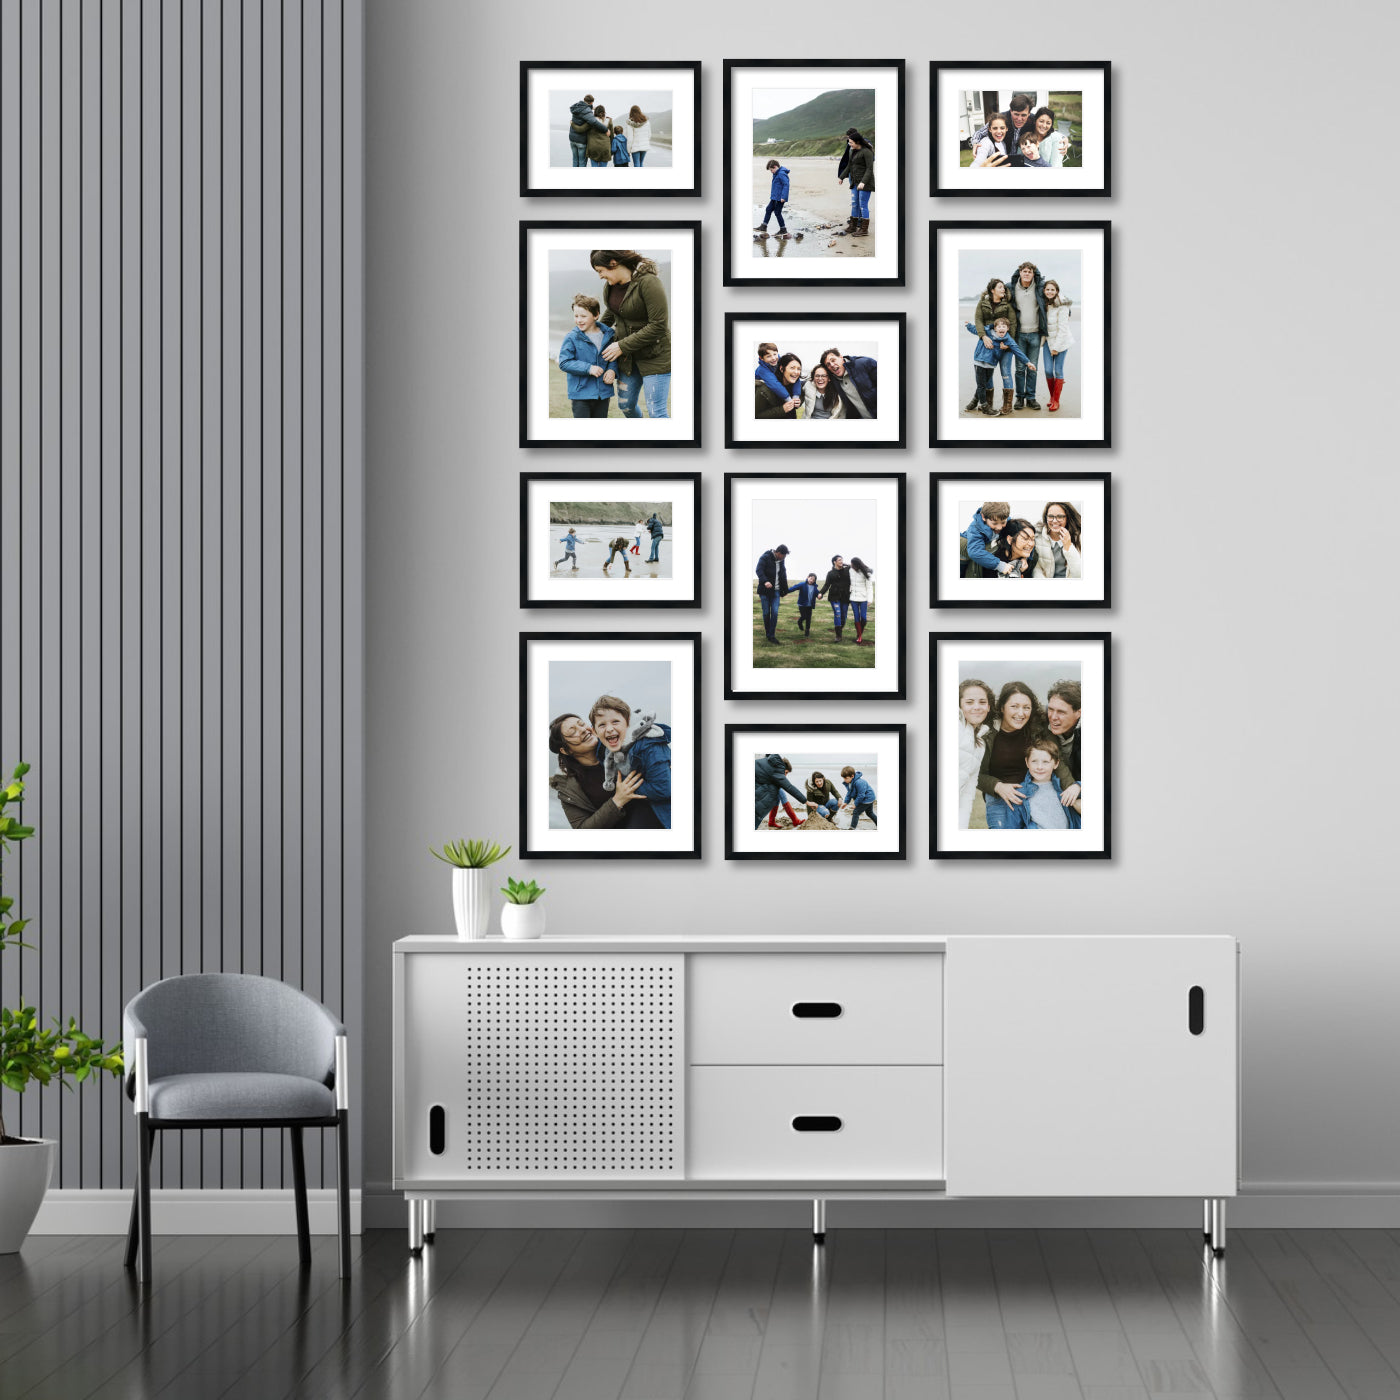 52" x 70" Gallery Wall Wooden Frame (Set of 12)